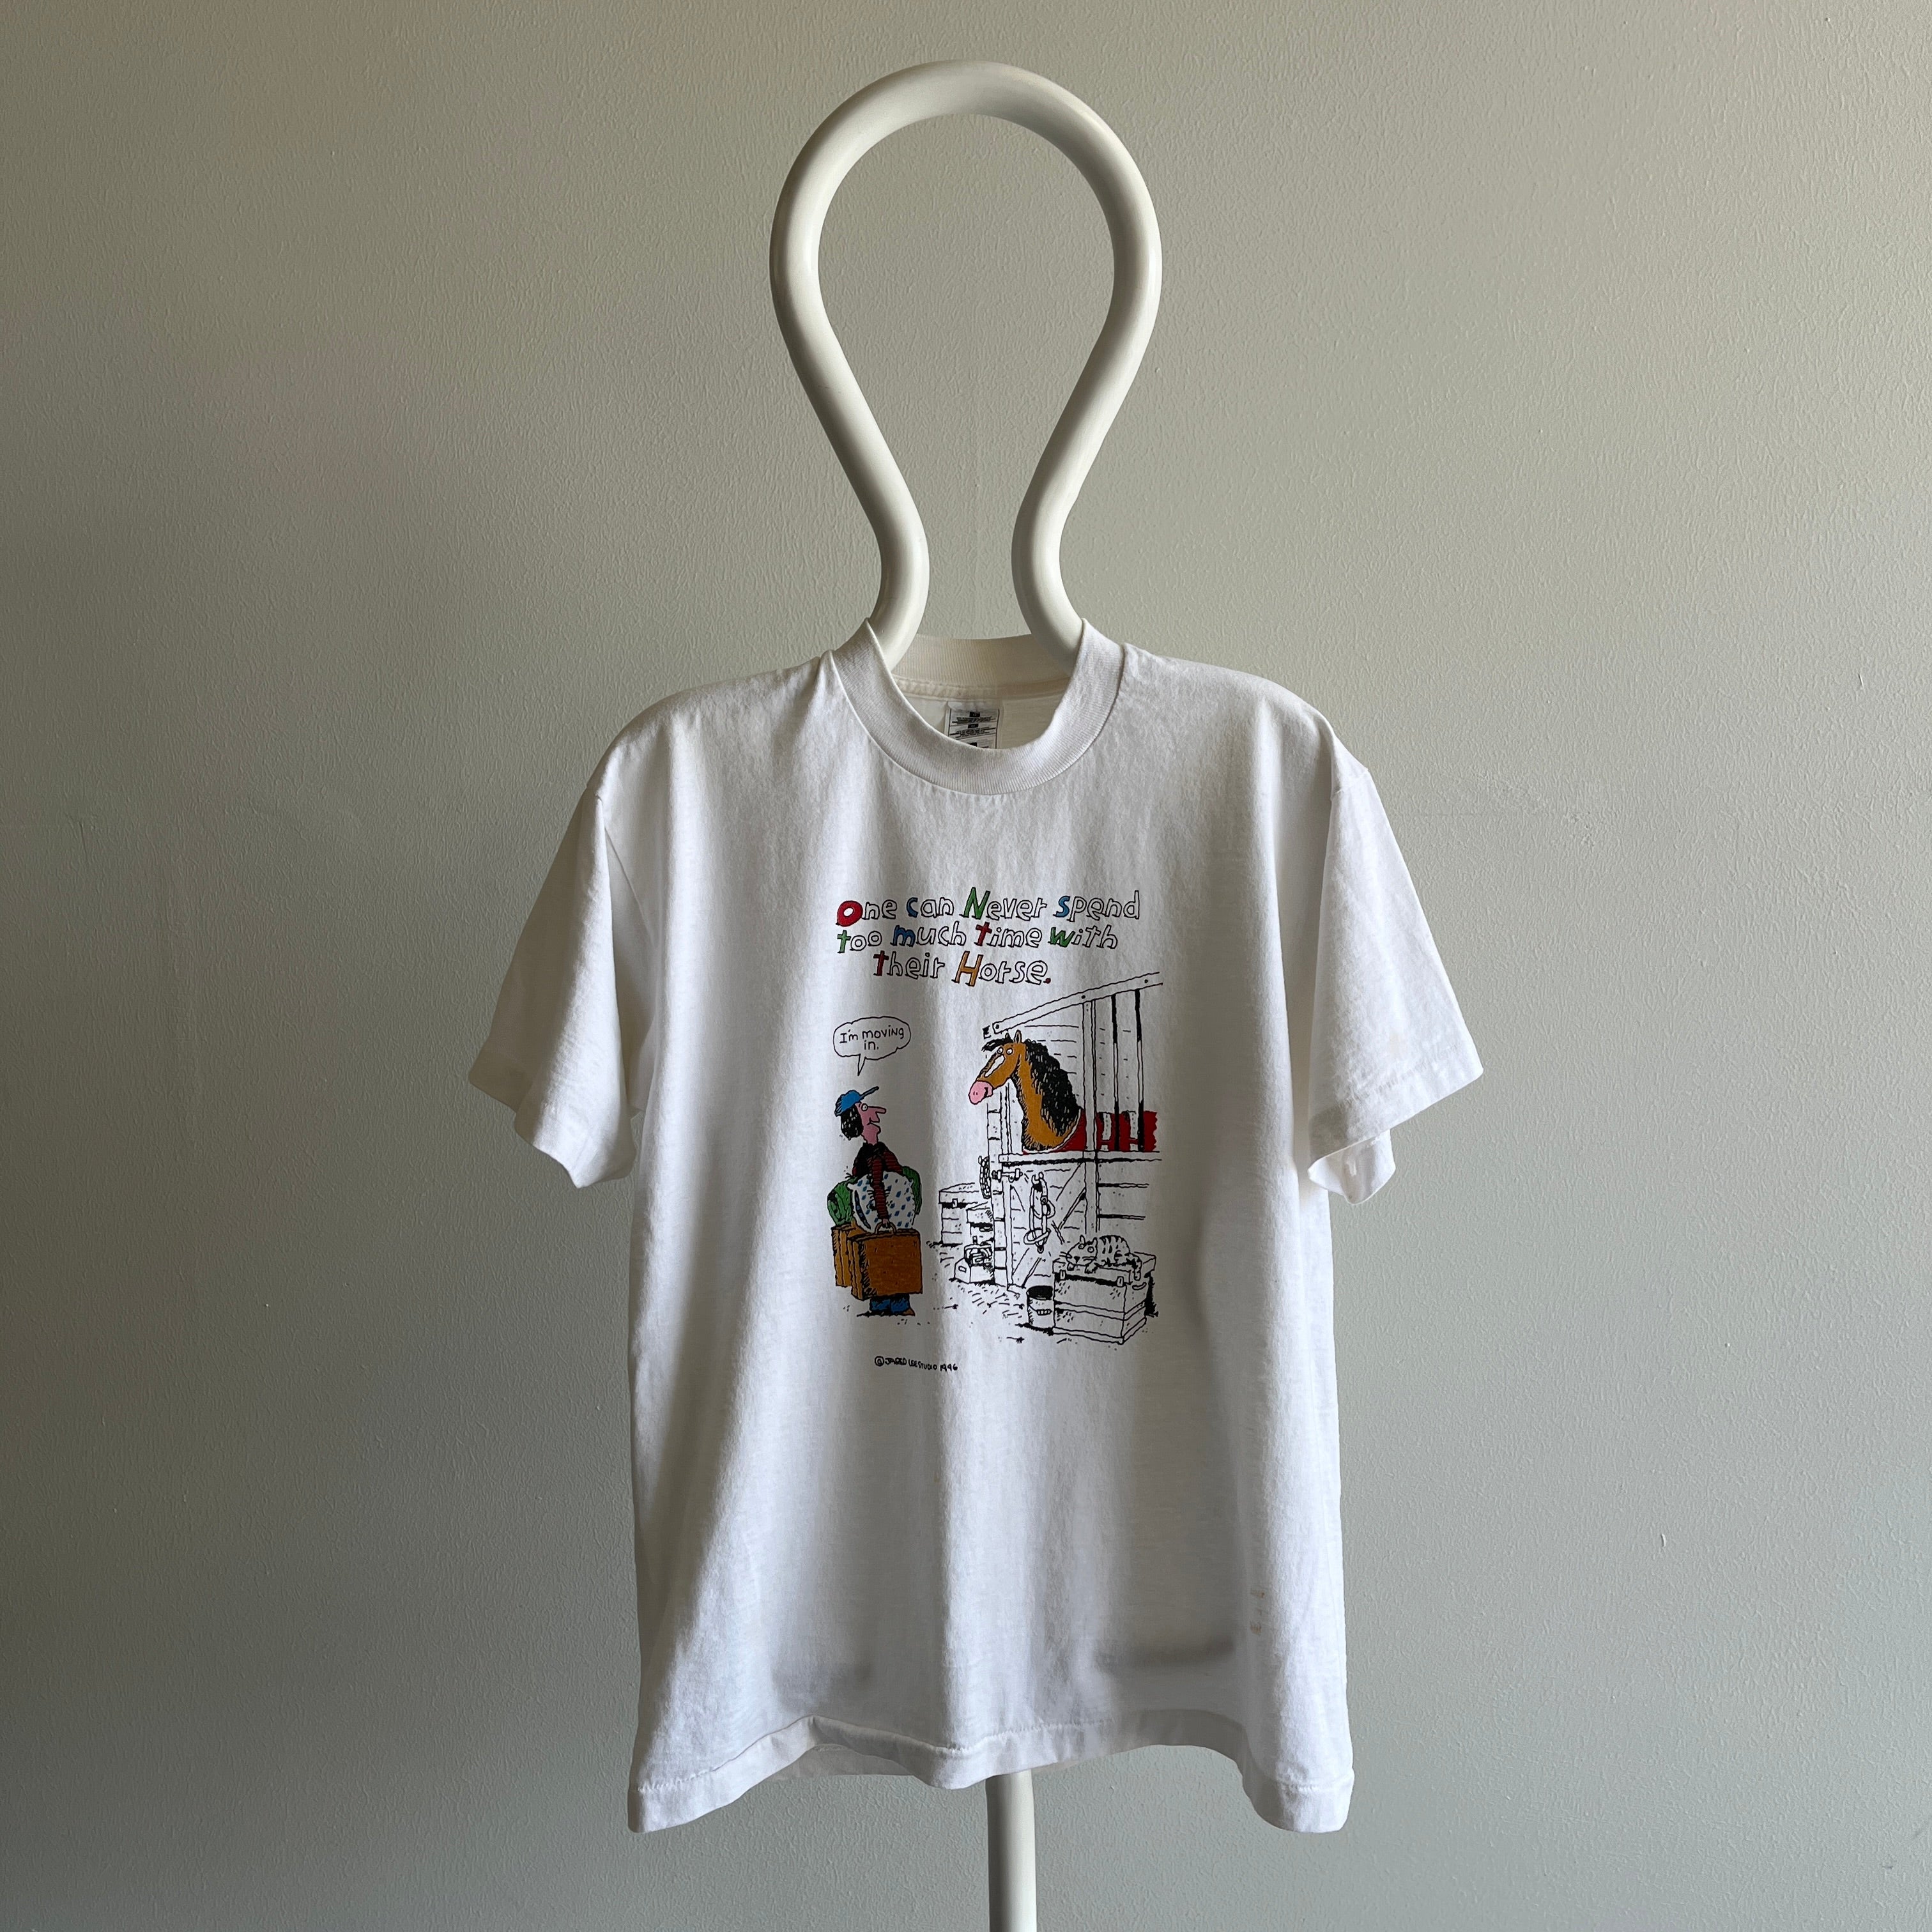 1996 One Can Never Spend Too Much Time With Their Horse (I Agree!) T-Shirt